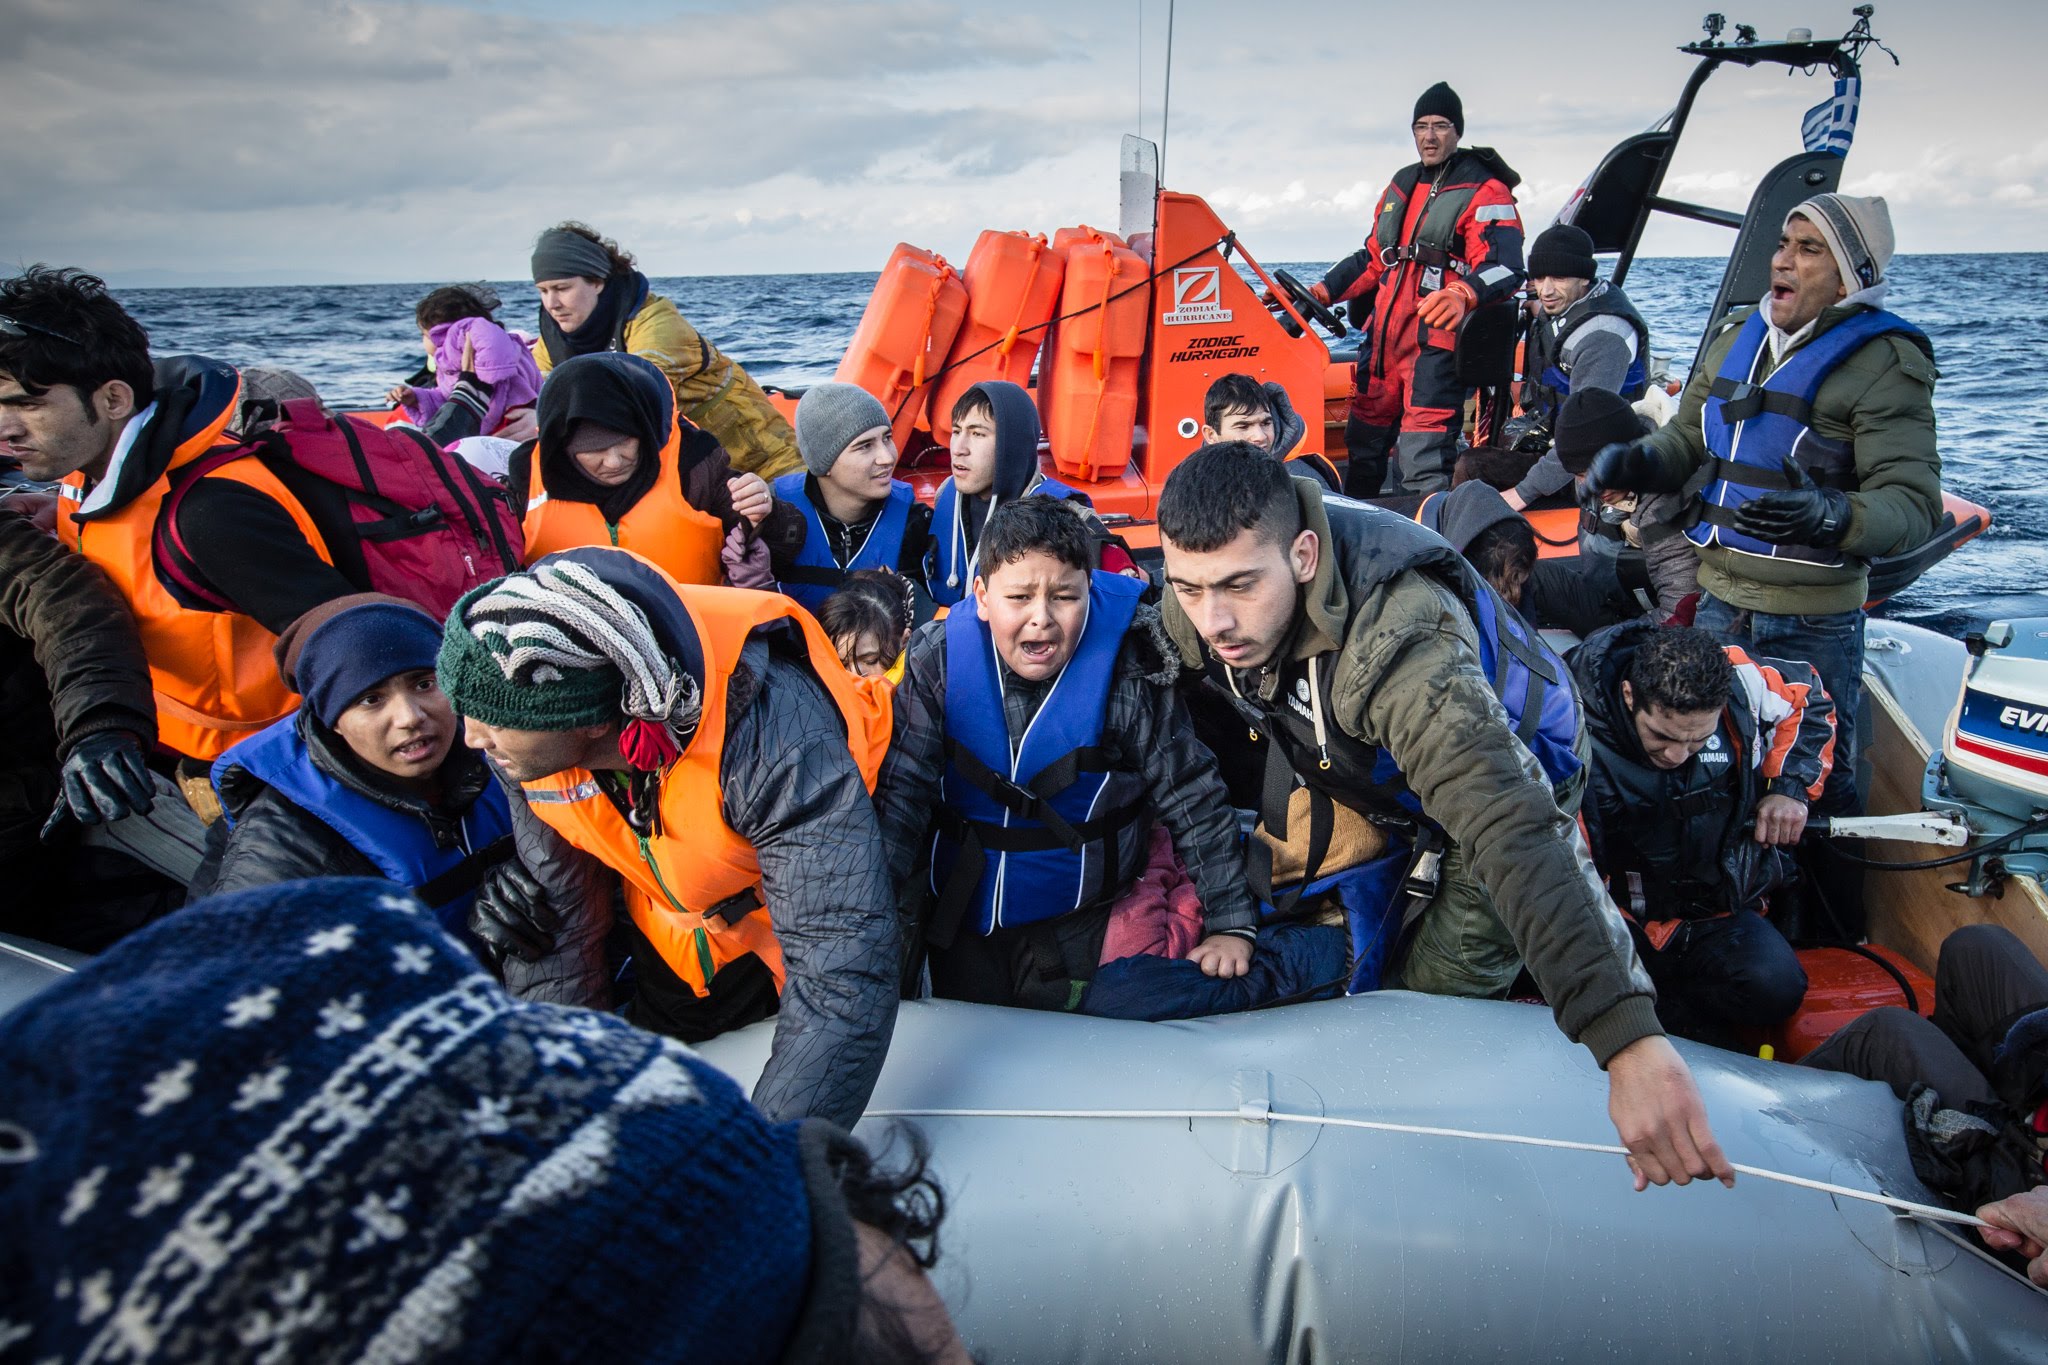 Europe has afforded the migrant a poor welcome: reflections on volunteering in Greece